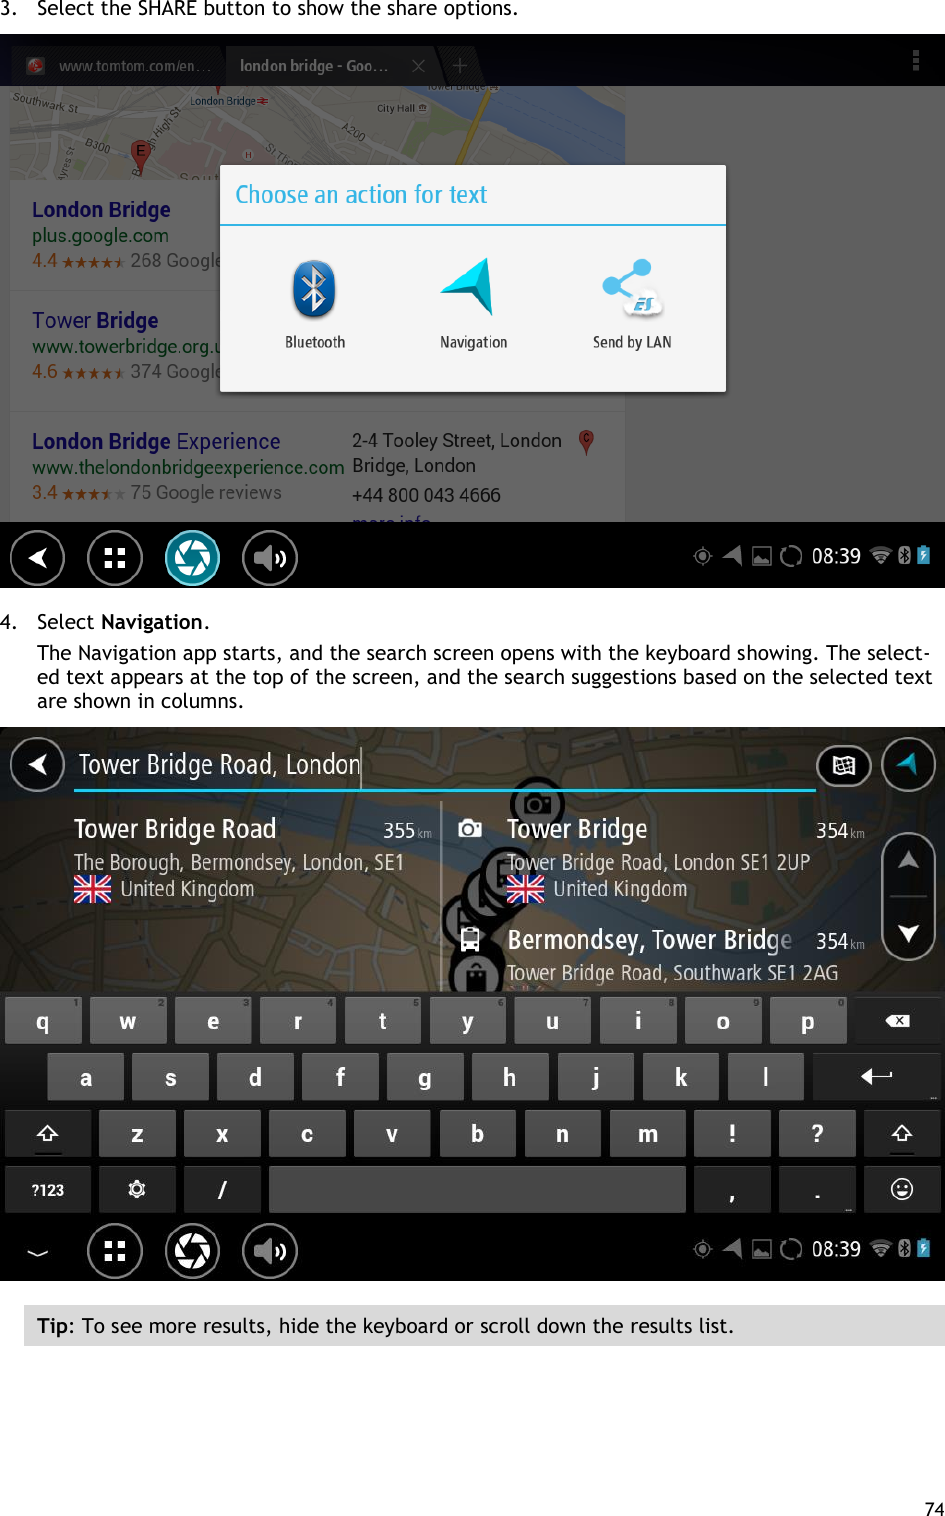  74  3. Select the SHARE button to show the share options.  4. Select Navigation. The Navigation app starts, and the search screen opens with the keyboard showing. The select-ed text appears at the top of the screen, and the search suggestions based on the selected text are shown in columns.  Tip: To see more results, hide the keyboard or scroll down the results list. 